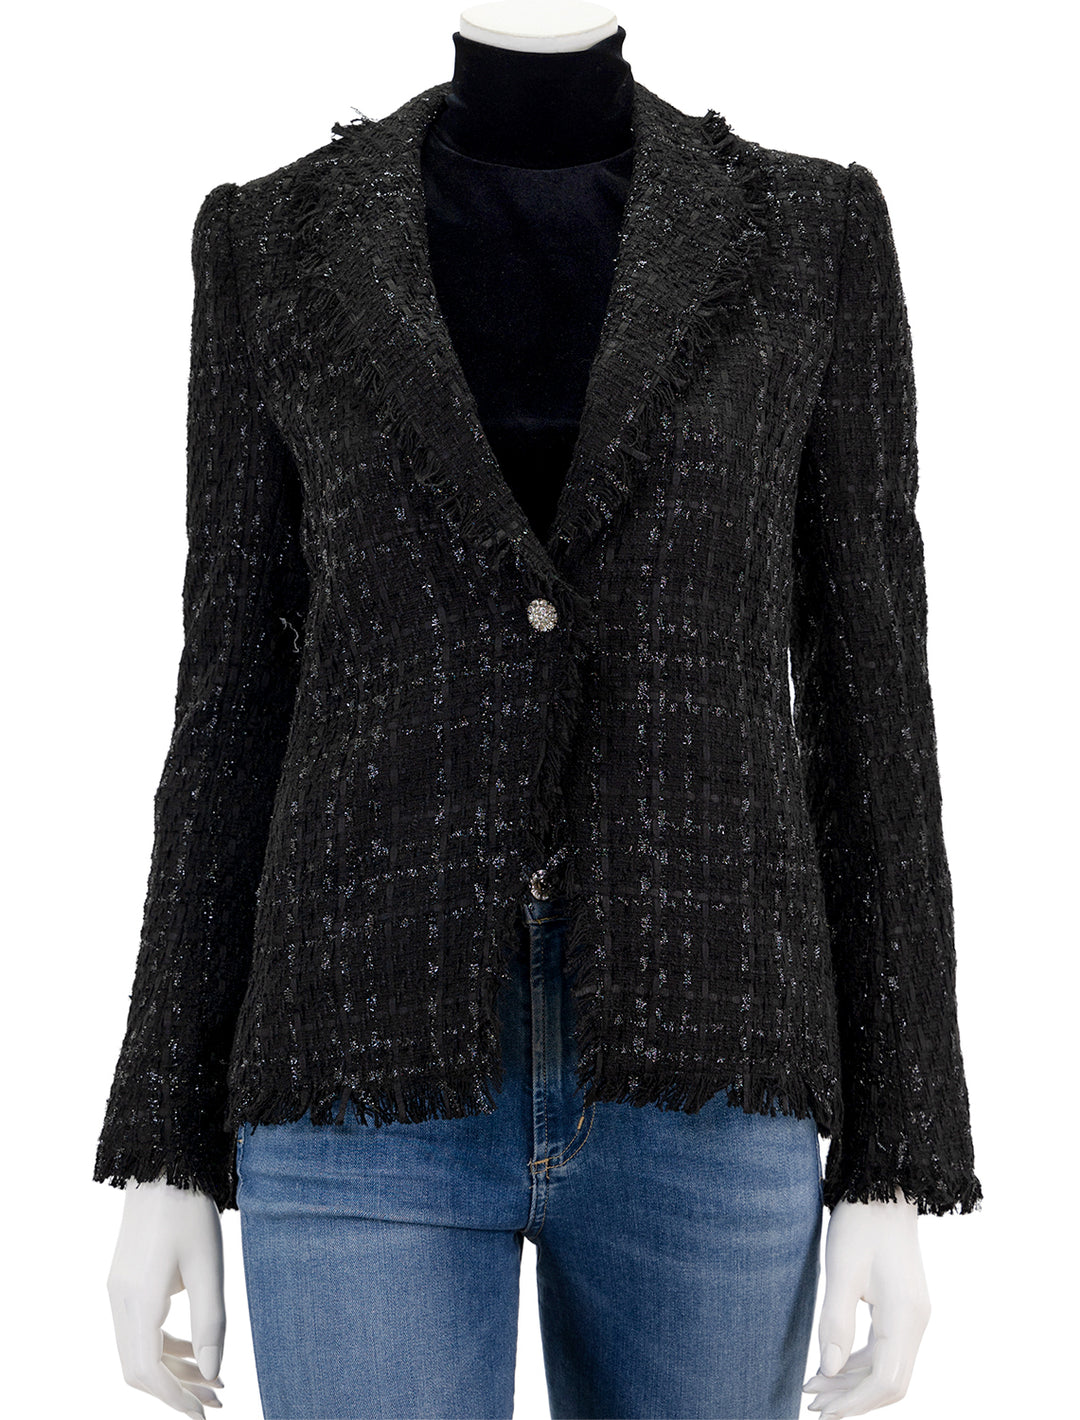 Front view of Derek Lam 10 Crosby's adelaide fringe bias jacket in black and silver, buttoned.